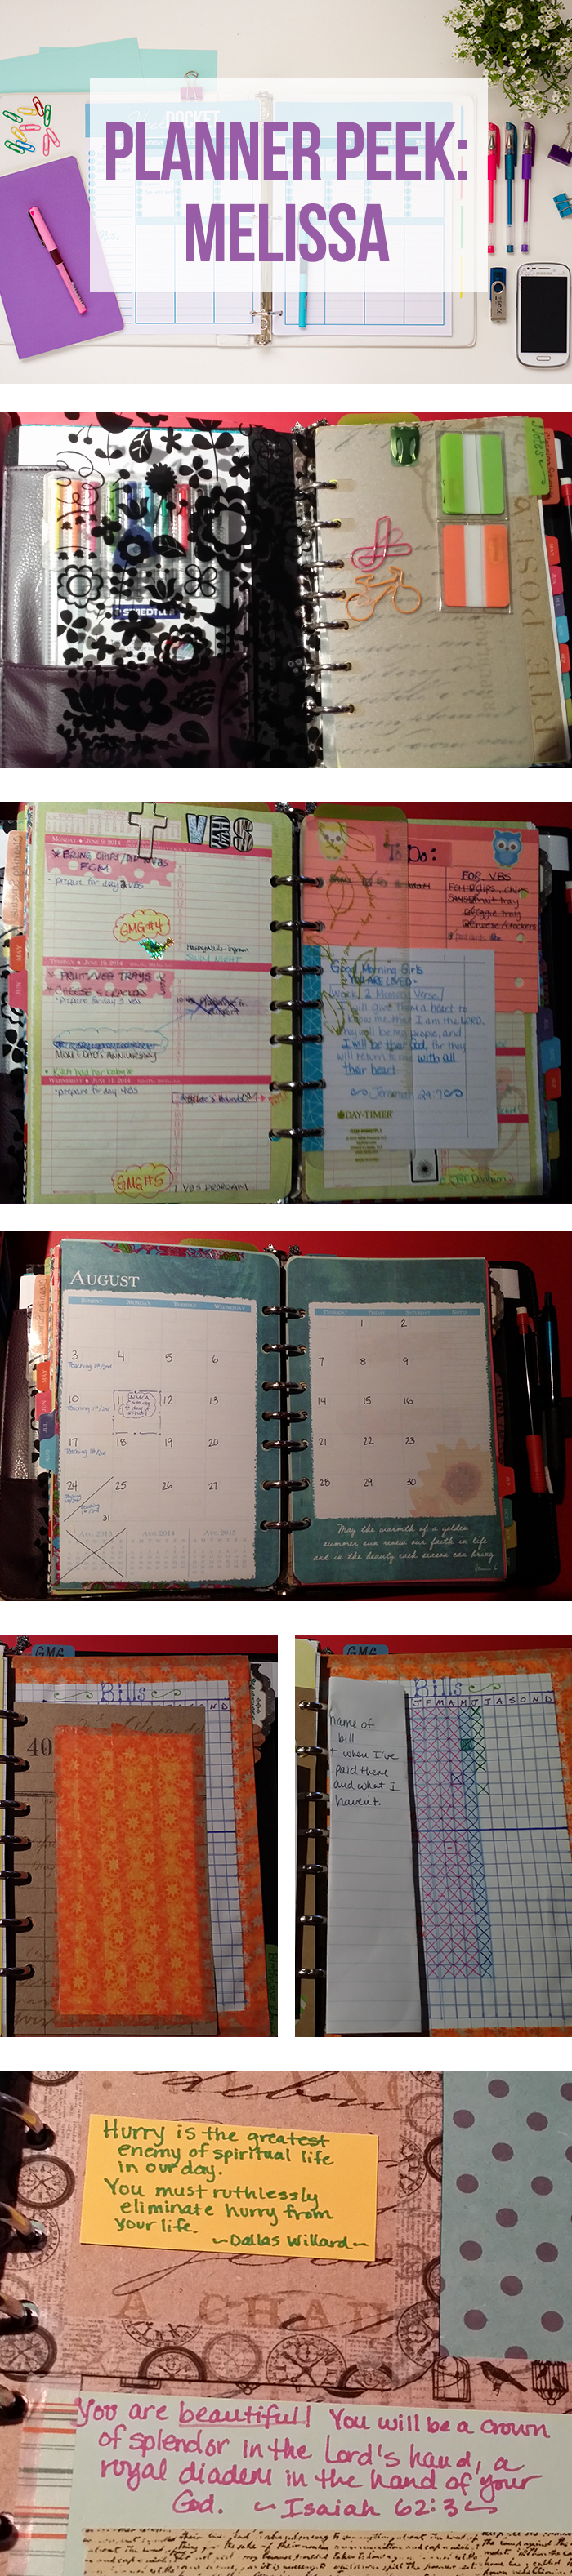 Take a tour of Melissa's Planner!